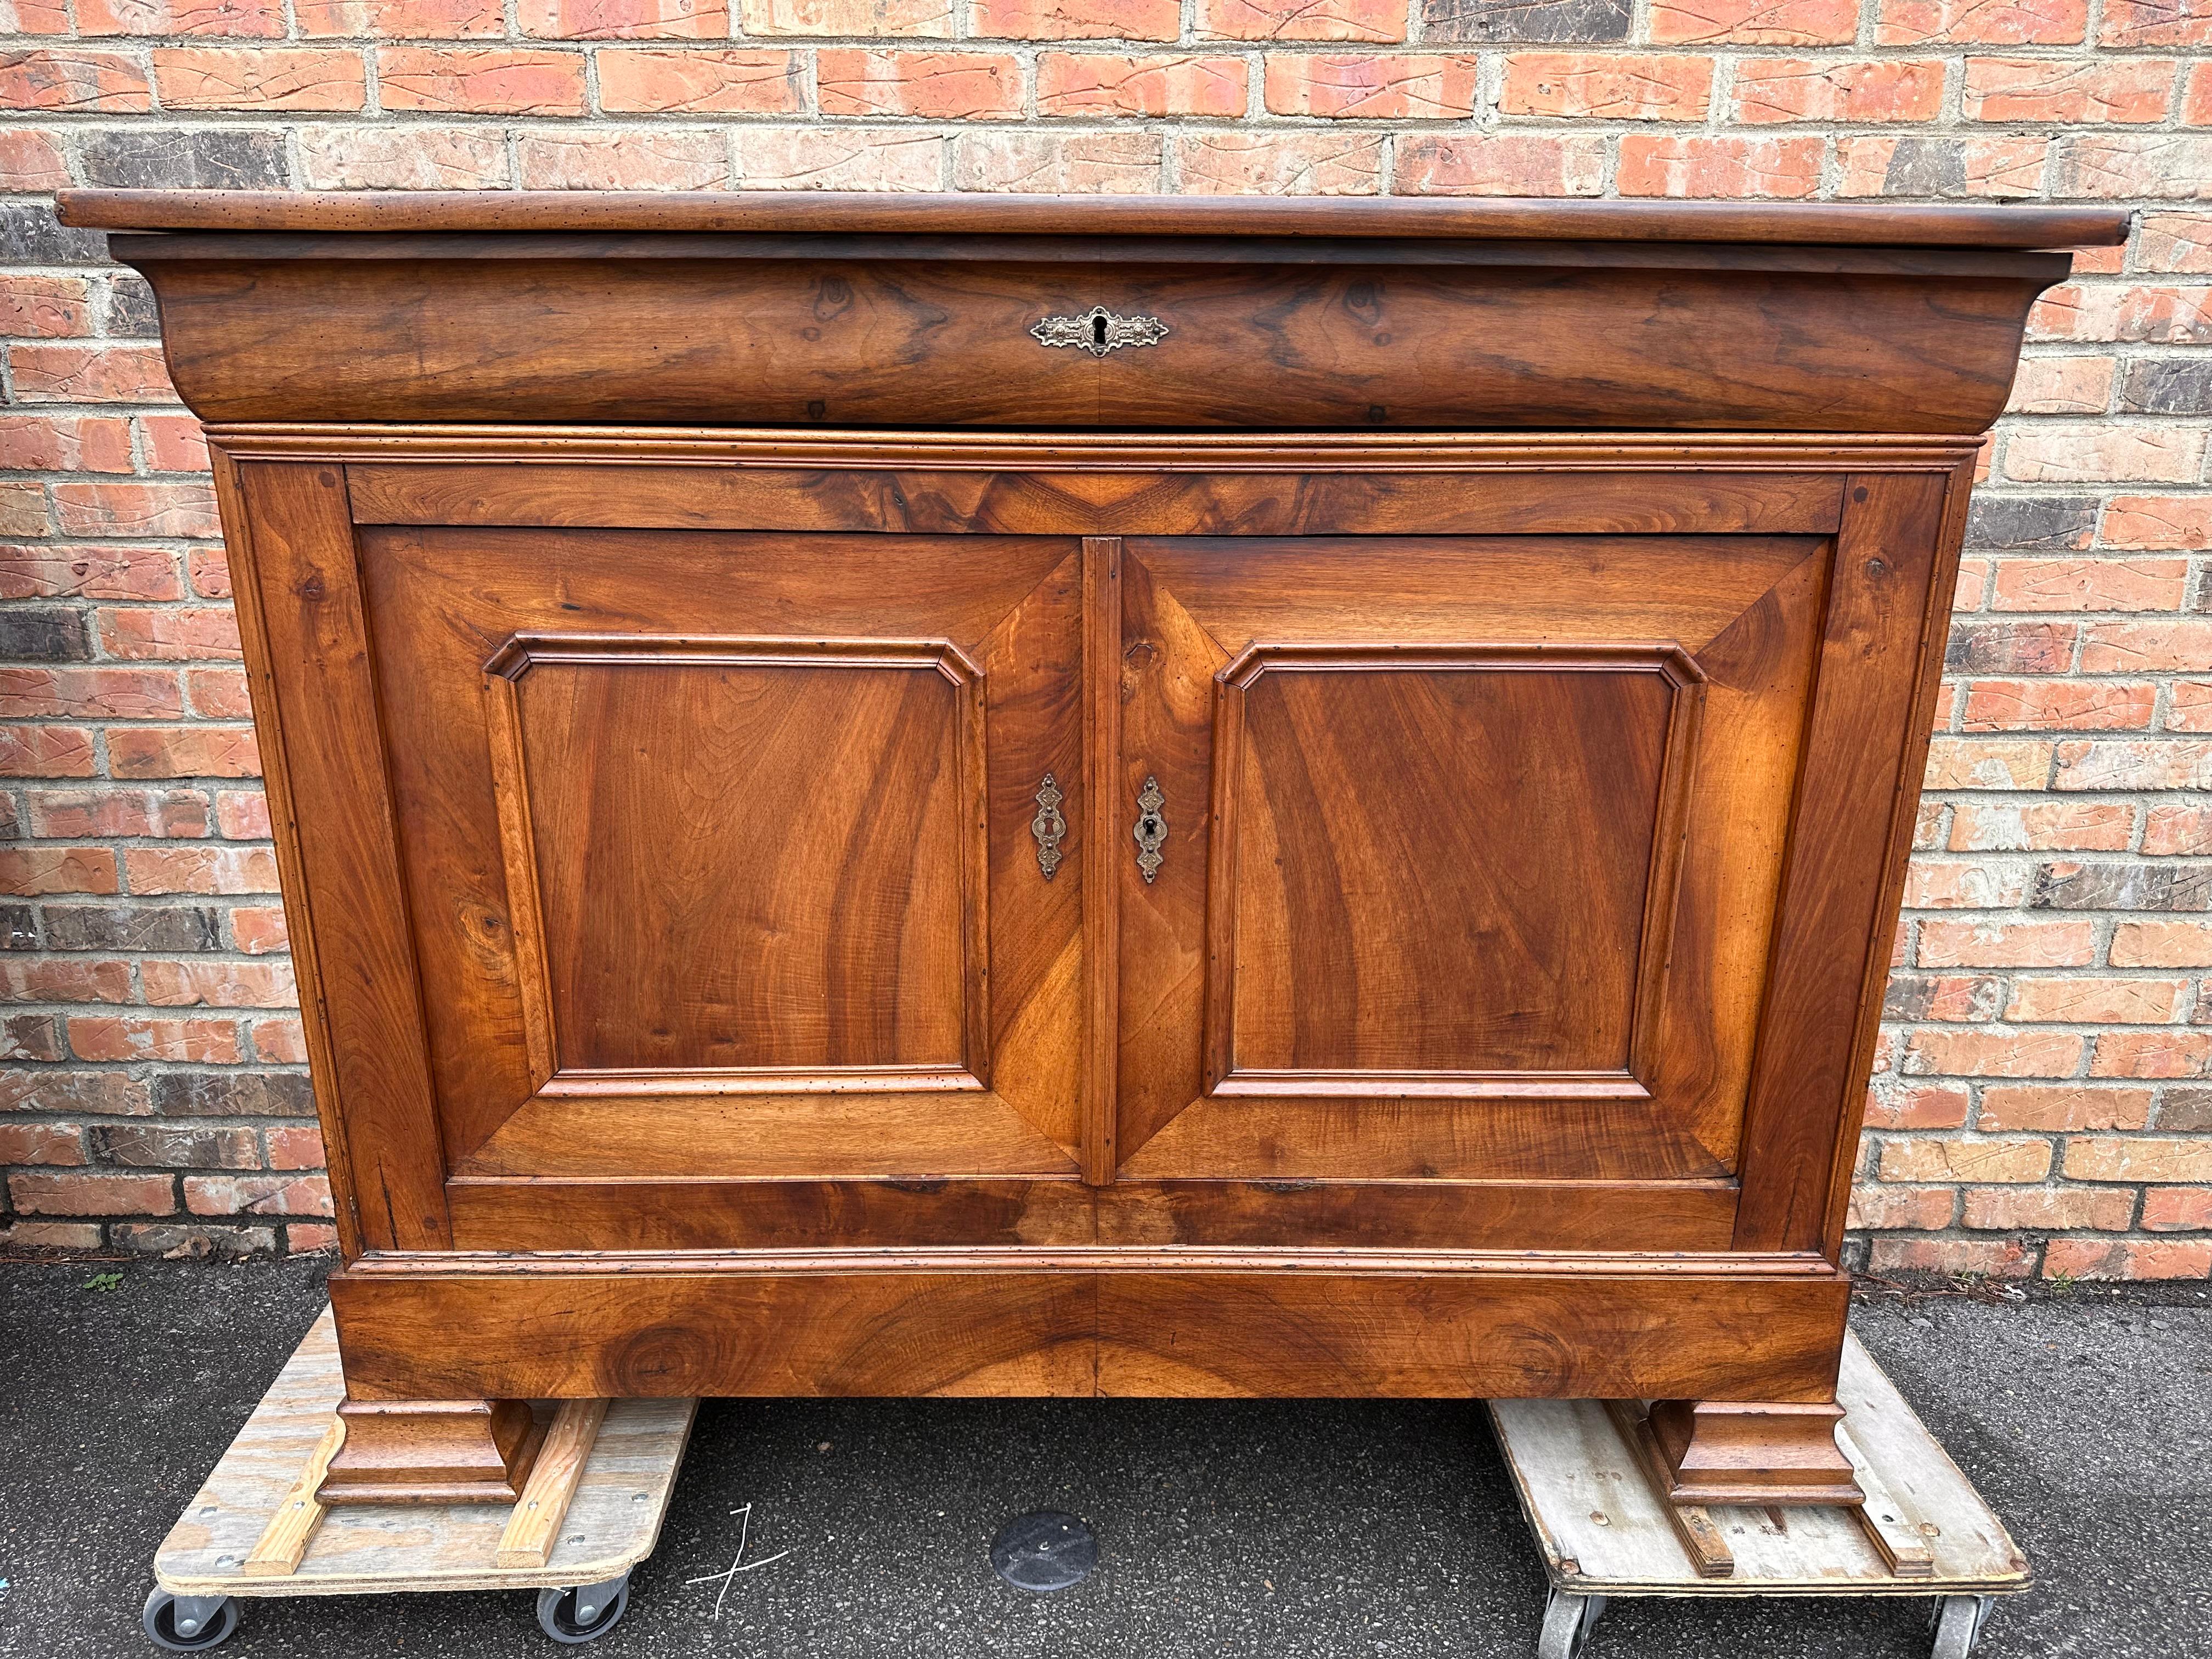 This is a beautiful 19th century French server featuring a single drawer above two doors that opens into storage. If this piece looks unusually clean inside it’s because we totally vacuum and thoroughly clean the inside of all the dirt and debris.